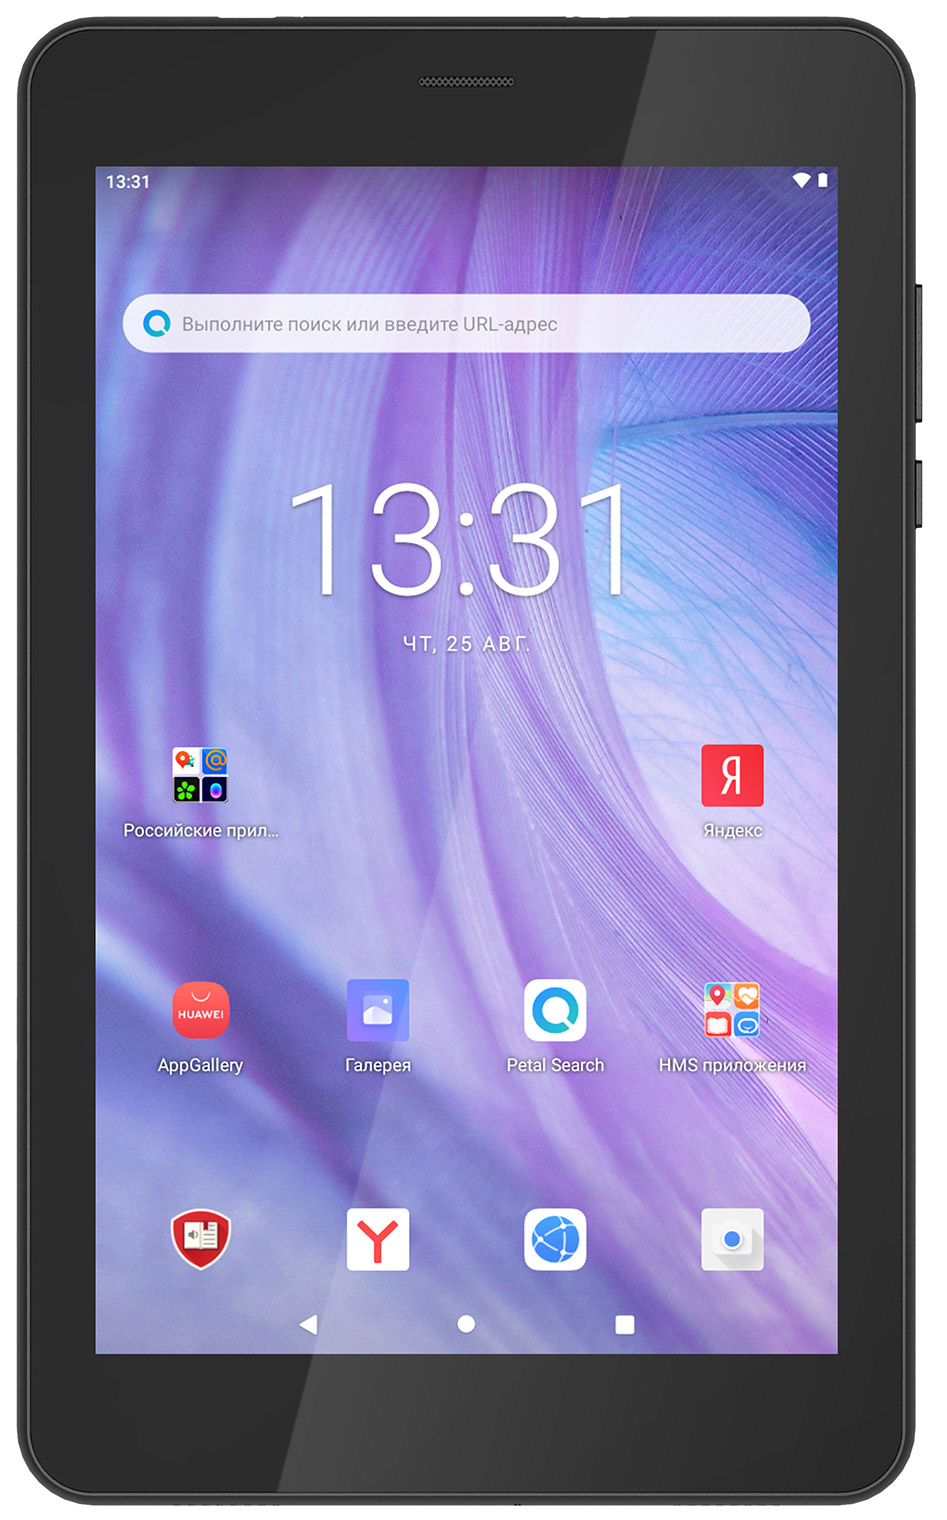 Планшет Top Device Tablet А8 2/32GB черный topdevice tablet a8 8 800x1280 ips 2d g p tp android 11 go edition up to 2 0ghz 4 core unisoc tiger t310 2 32gb 4g gps bt 5 0 wifi usb t